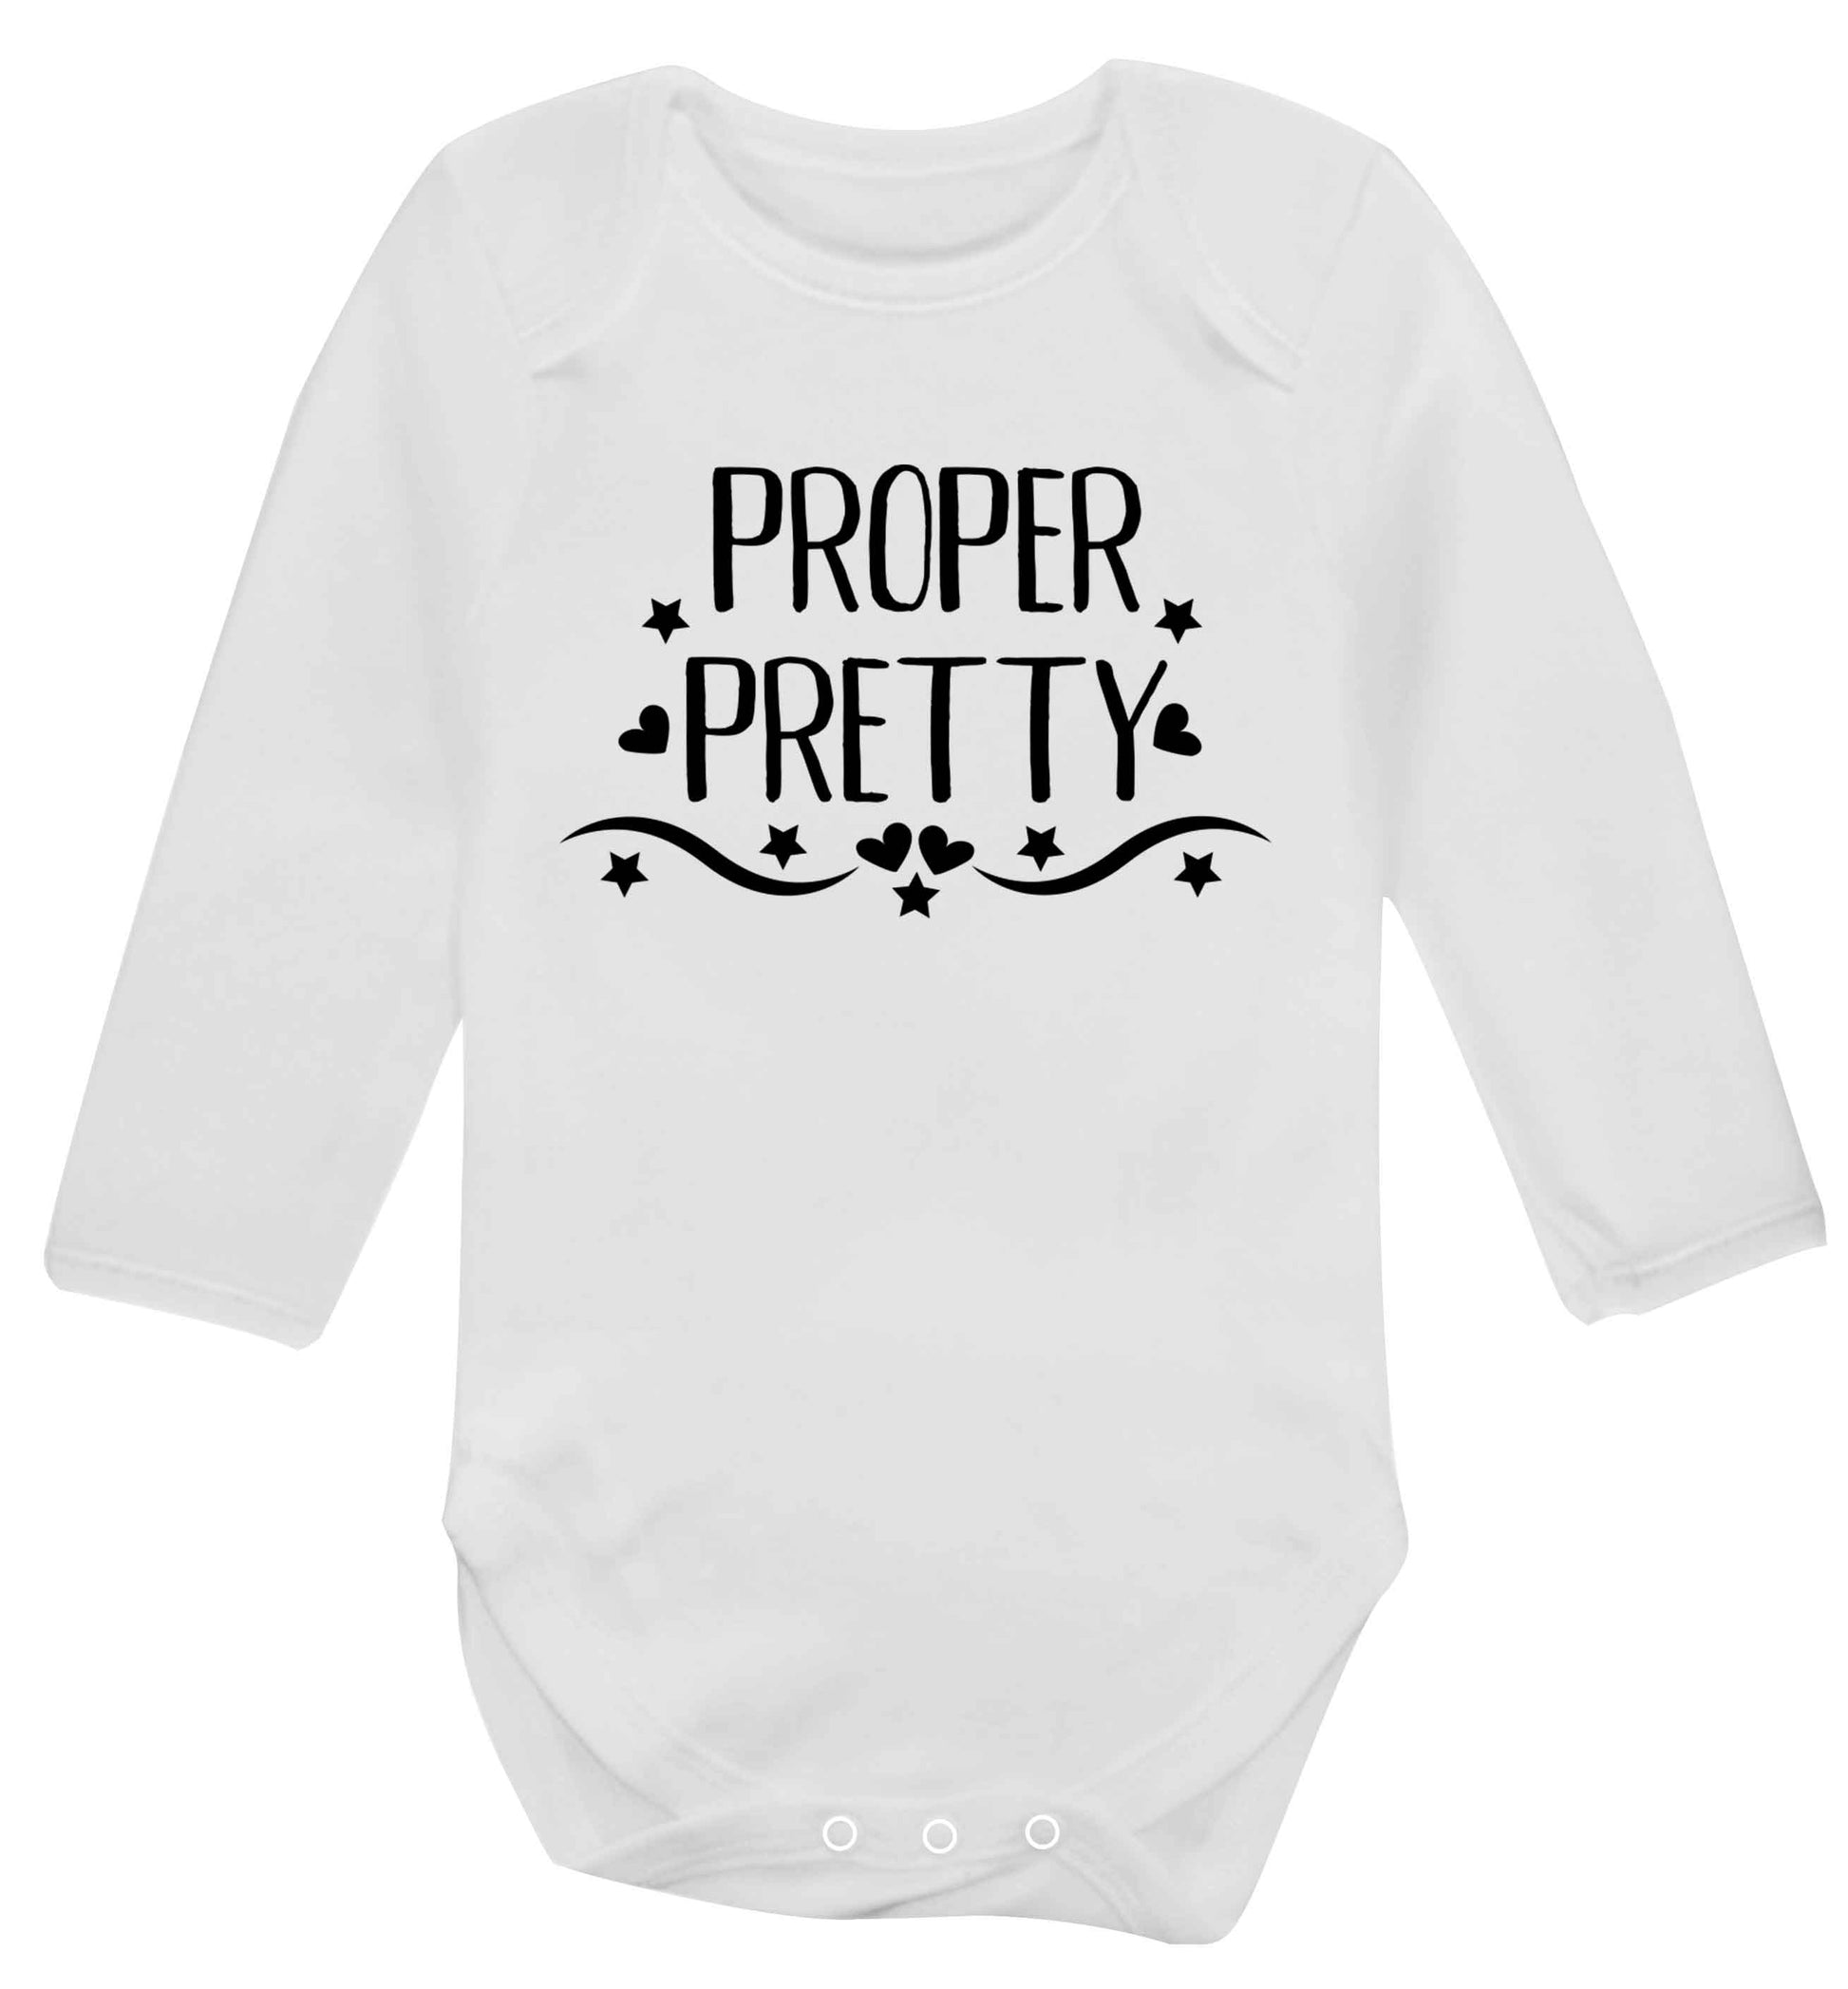 Proper pretty Baby Vest long sleeved white 6-12 months